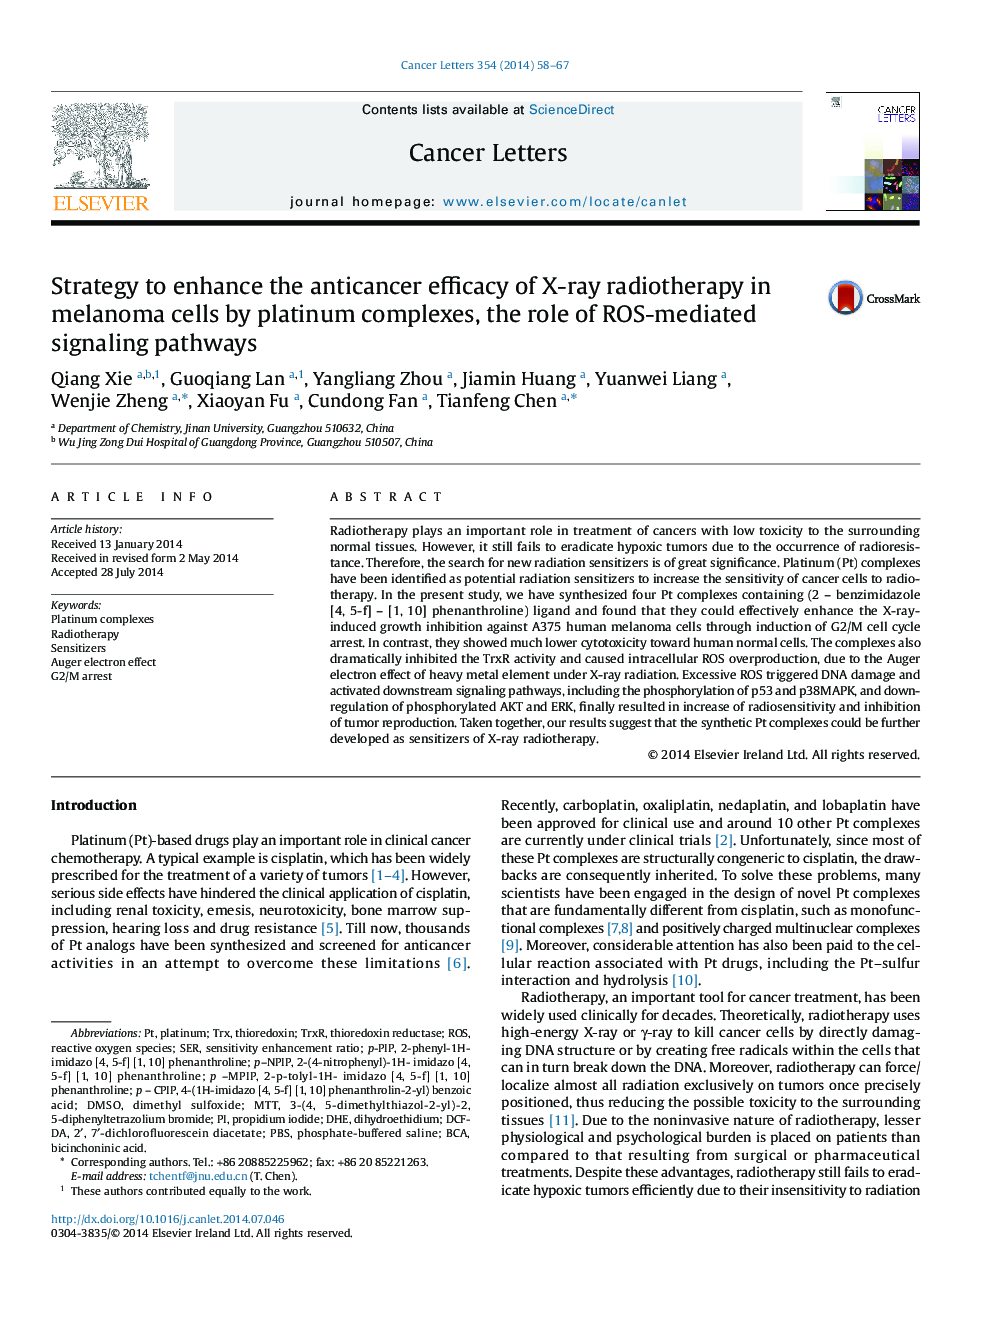 Strategy to enhance the anticancer efficacy of X-ray radiotherapy in melanoma cells by platinum complexes, the role of ROS-mediated signaling pathways